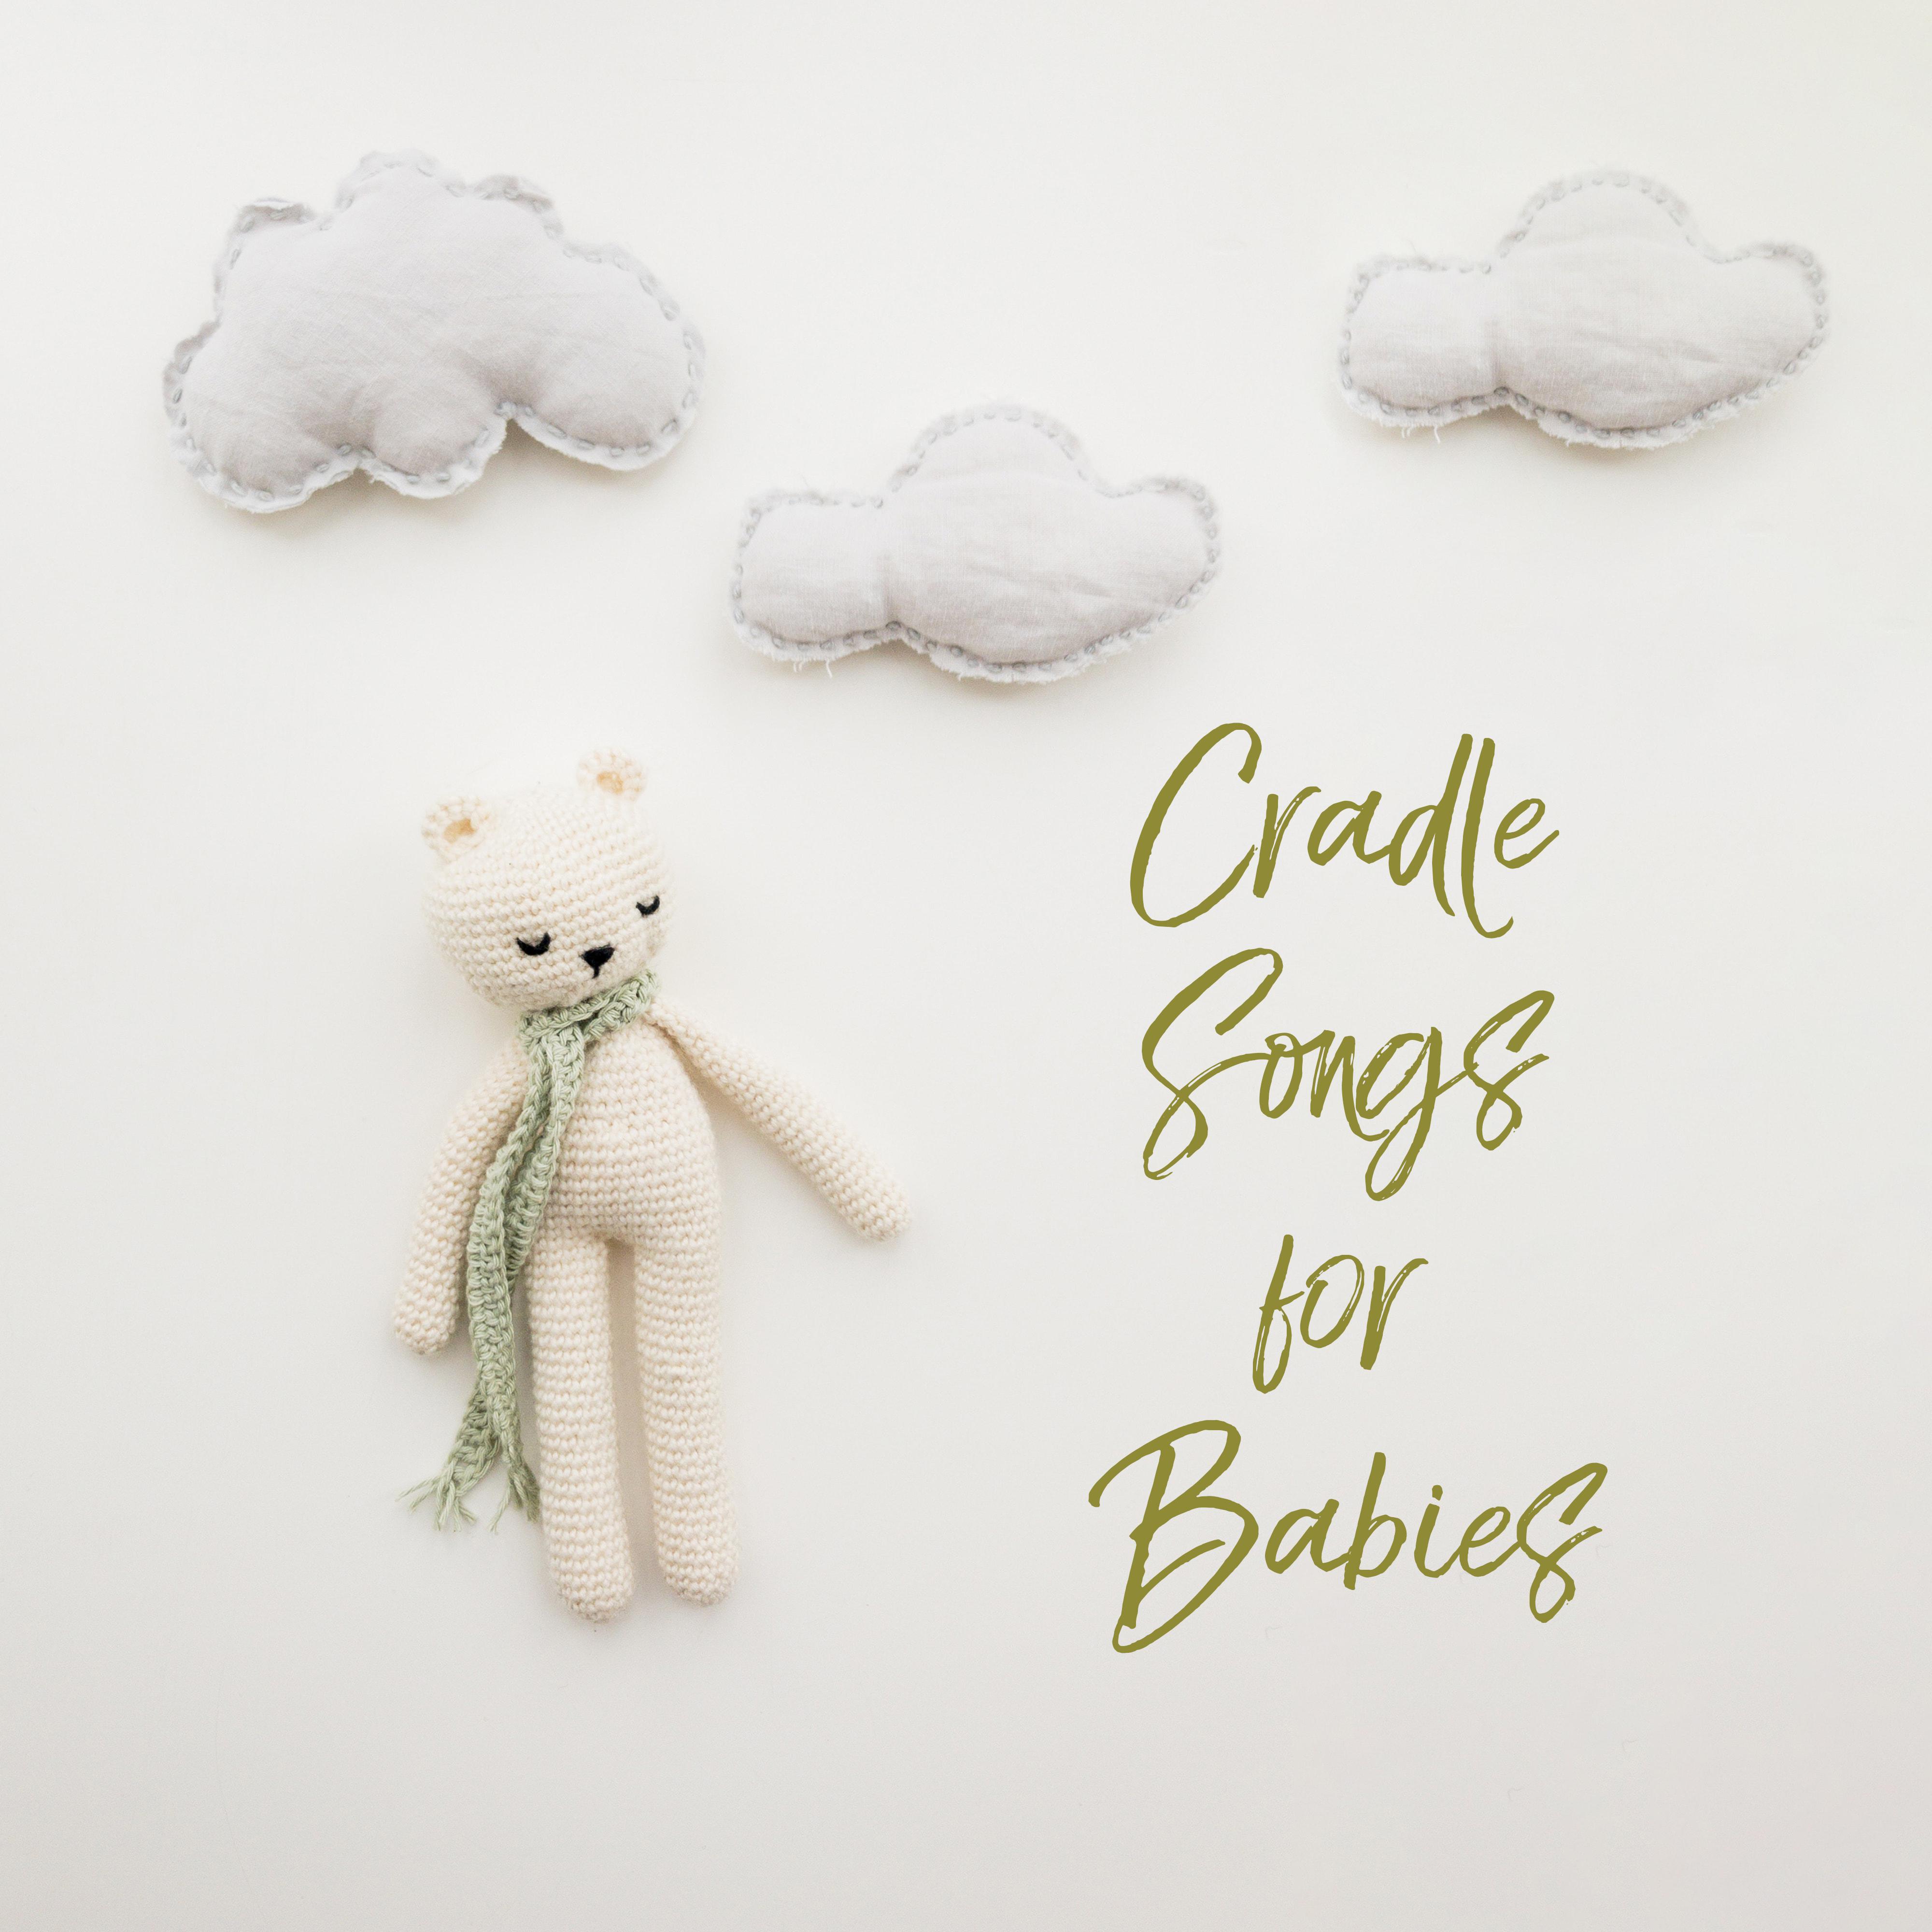 Cradle Songs for Babies